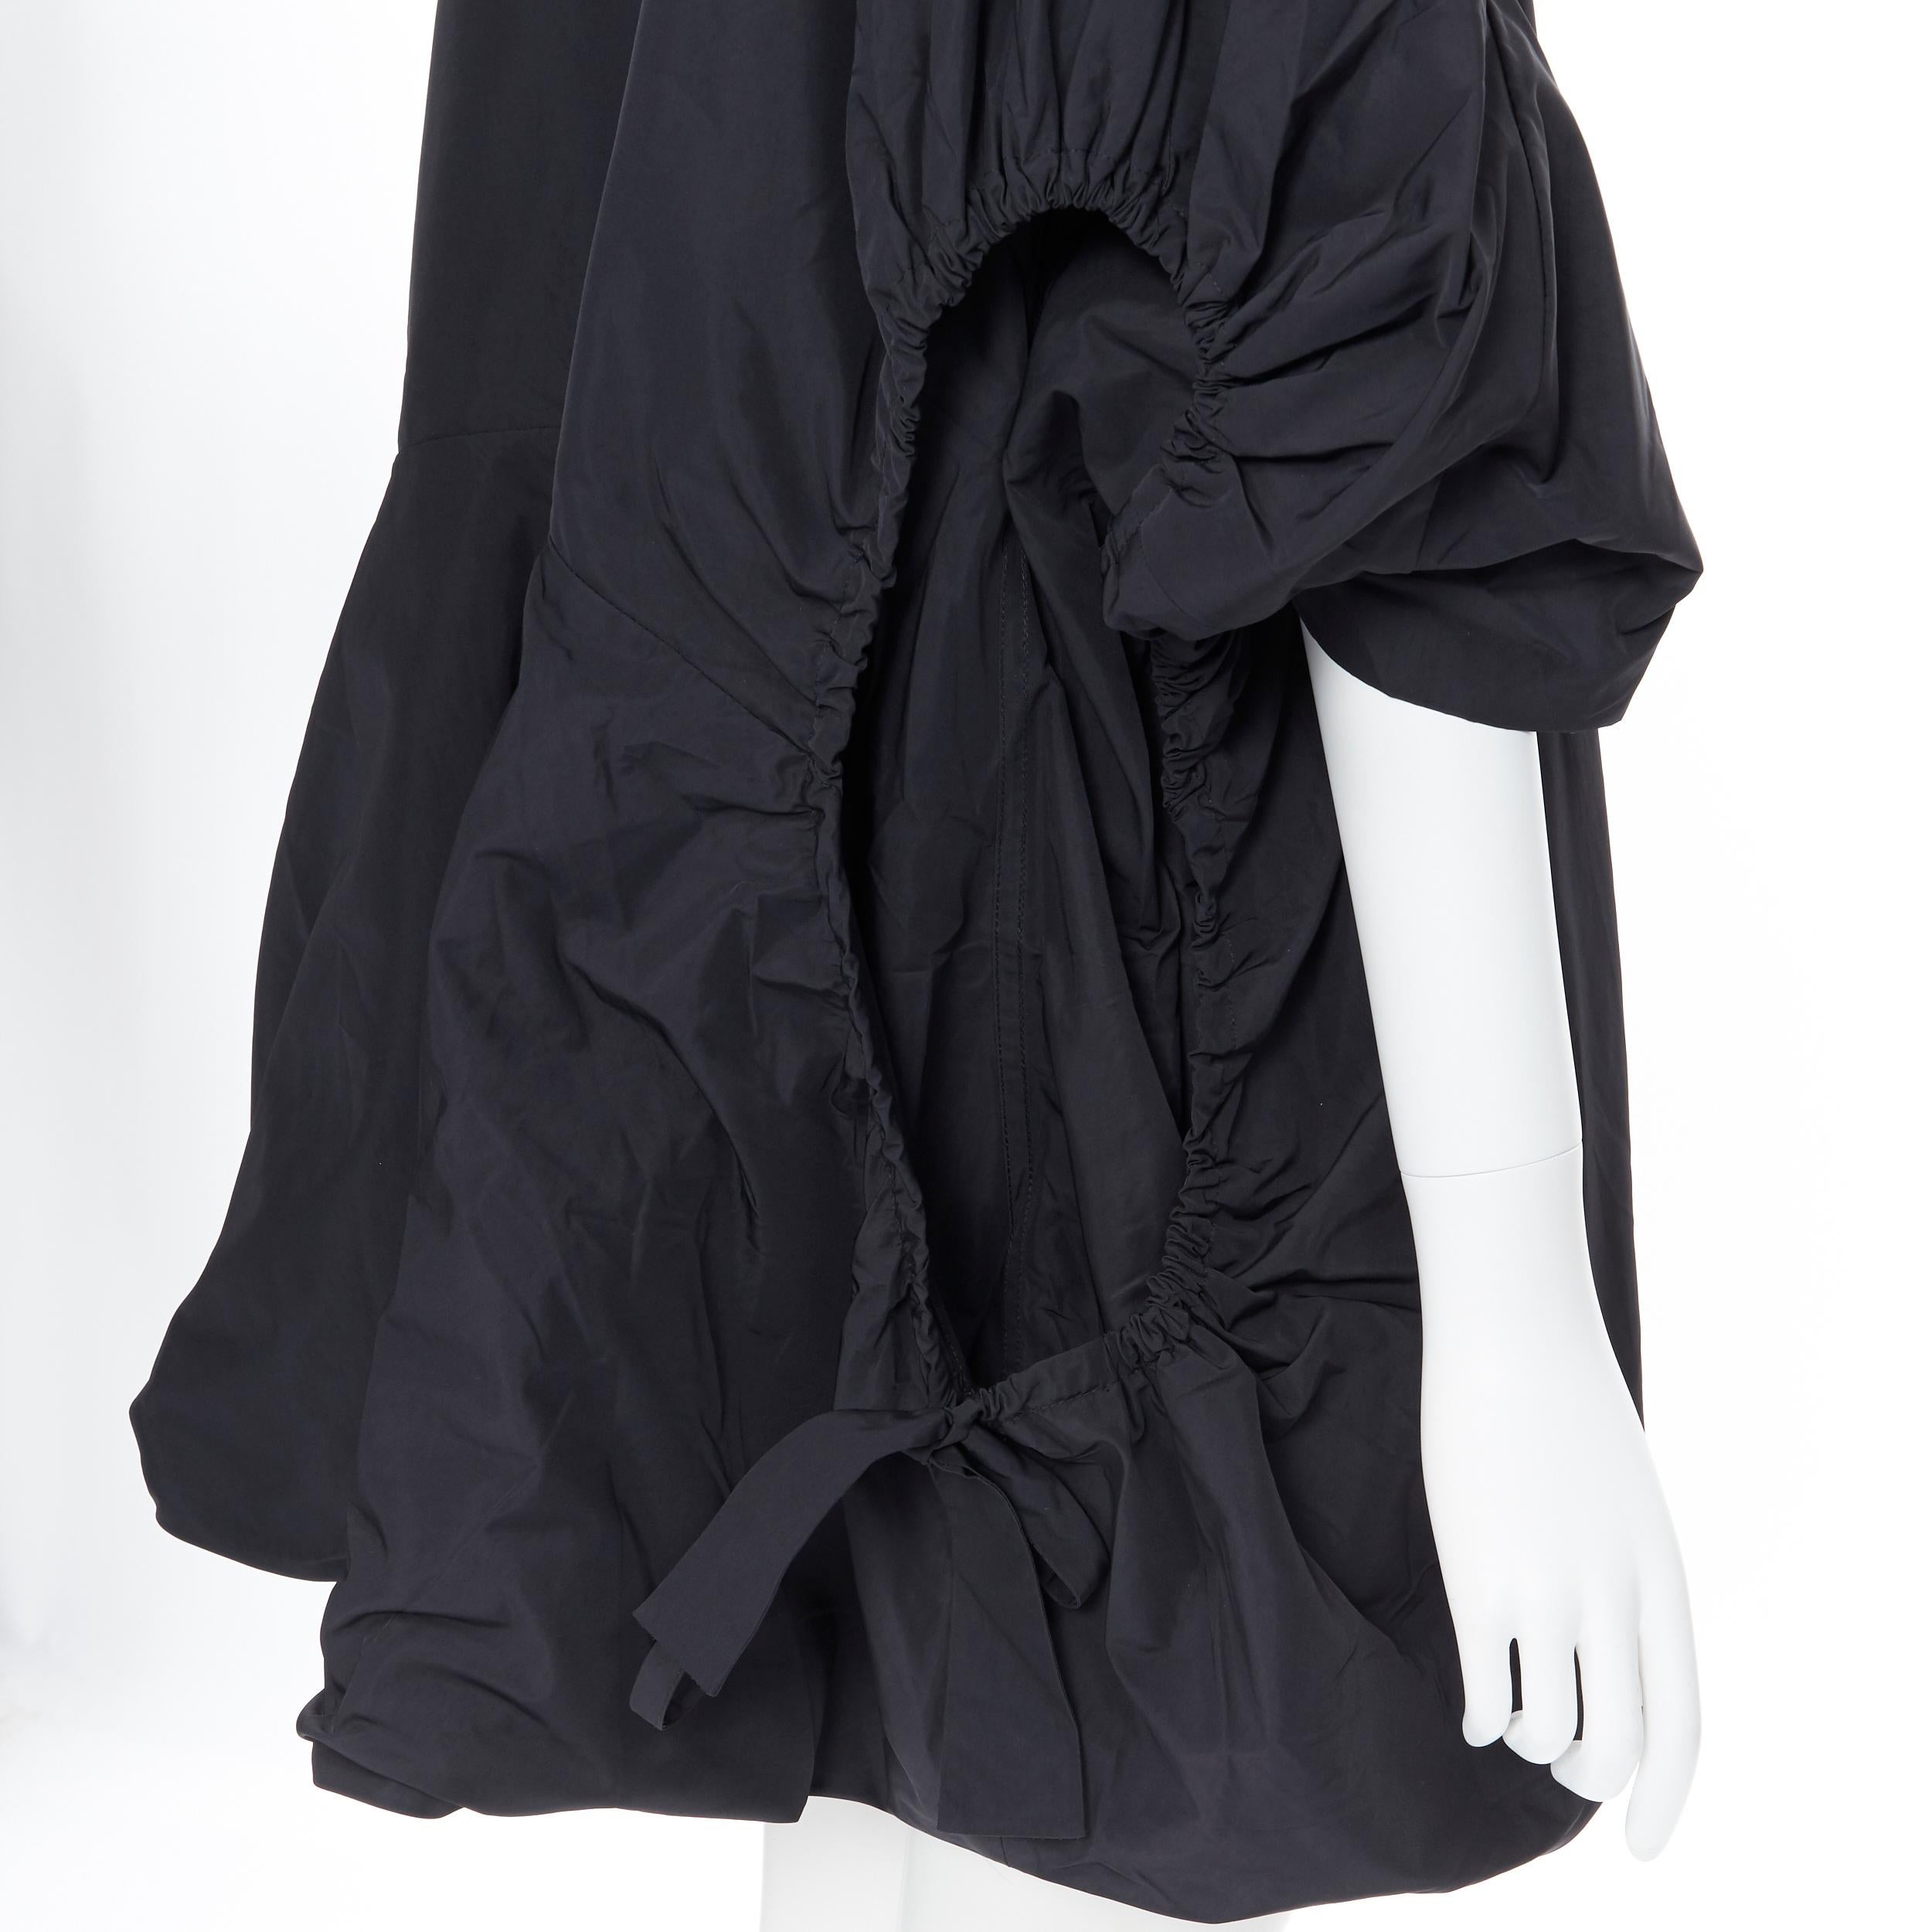 runway YVES SAINT LAURENT 2009 black nylon cut out drawstring cocoon coat FR38 S Reference: CEWG/A00006 
Brand: Yves Saint Laurent 
Designer: Stefano Pilati 
Collection: Spring Summer 2019 Runway 
Material: Polyester 
Color: Black 
Pattern: Solid